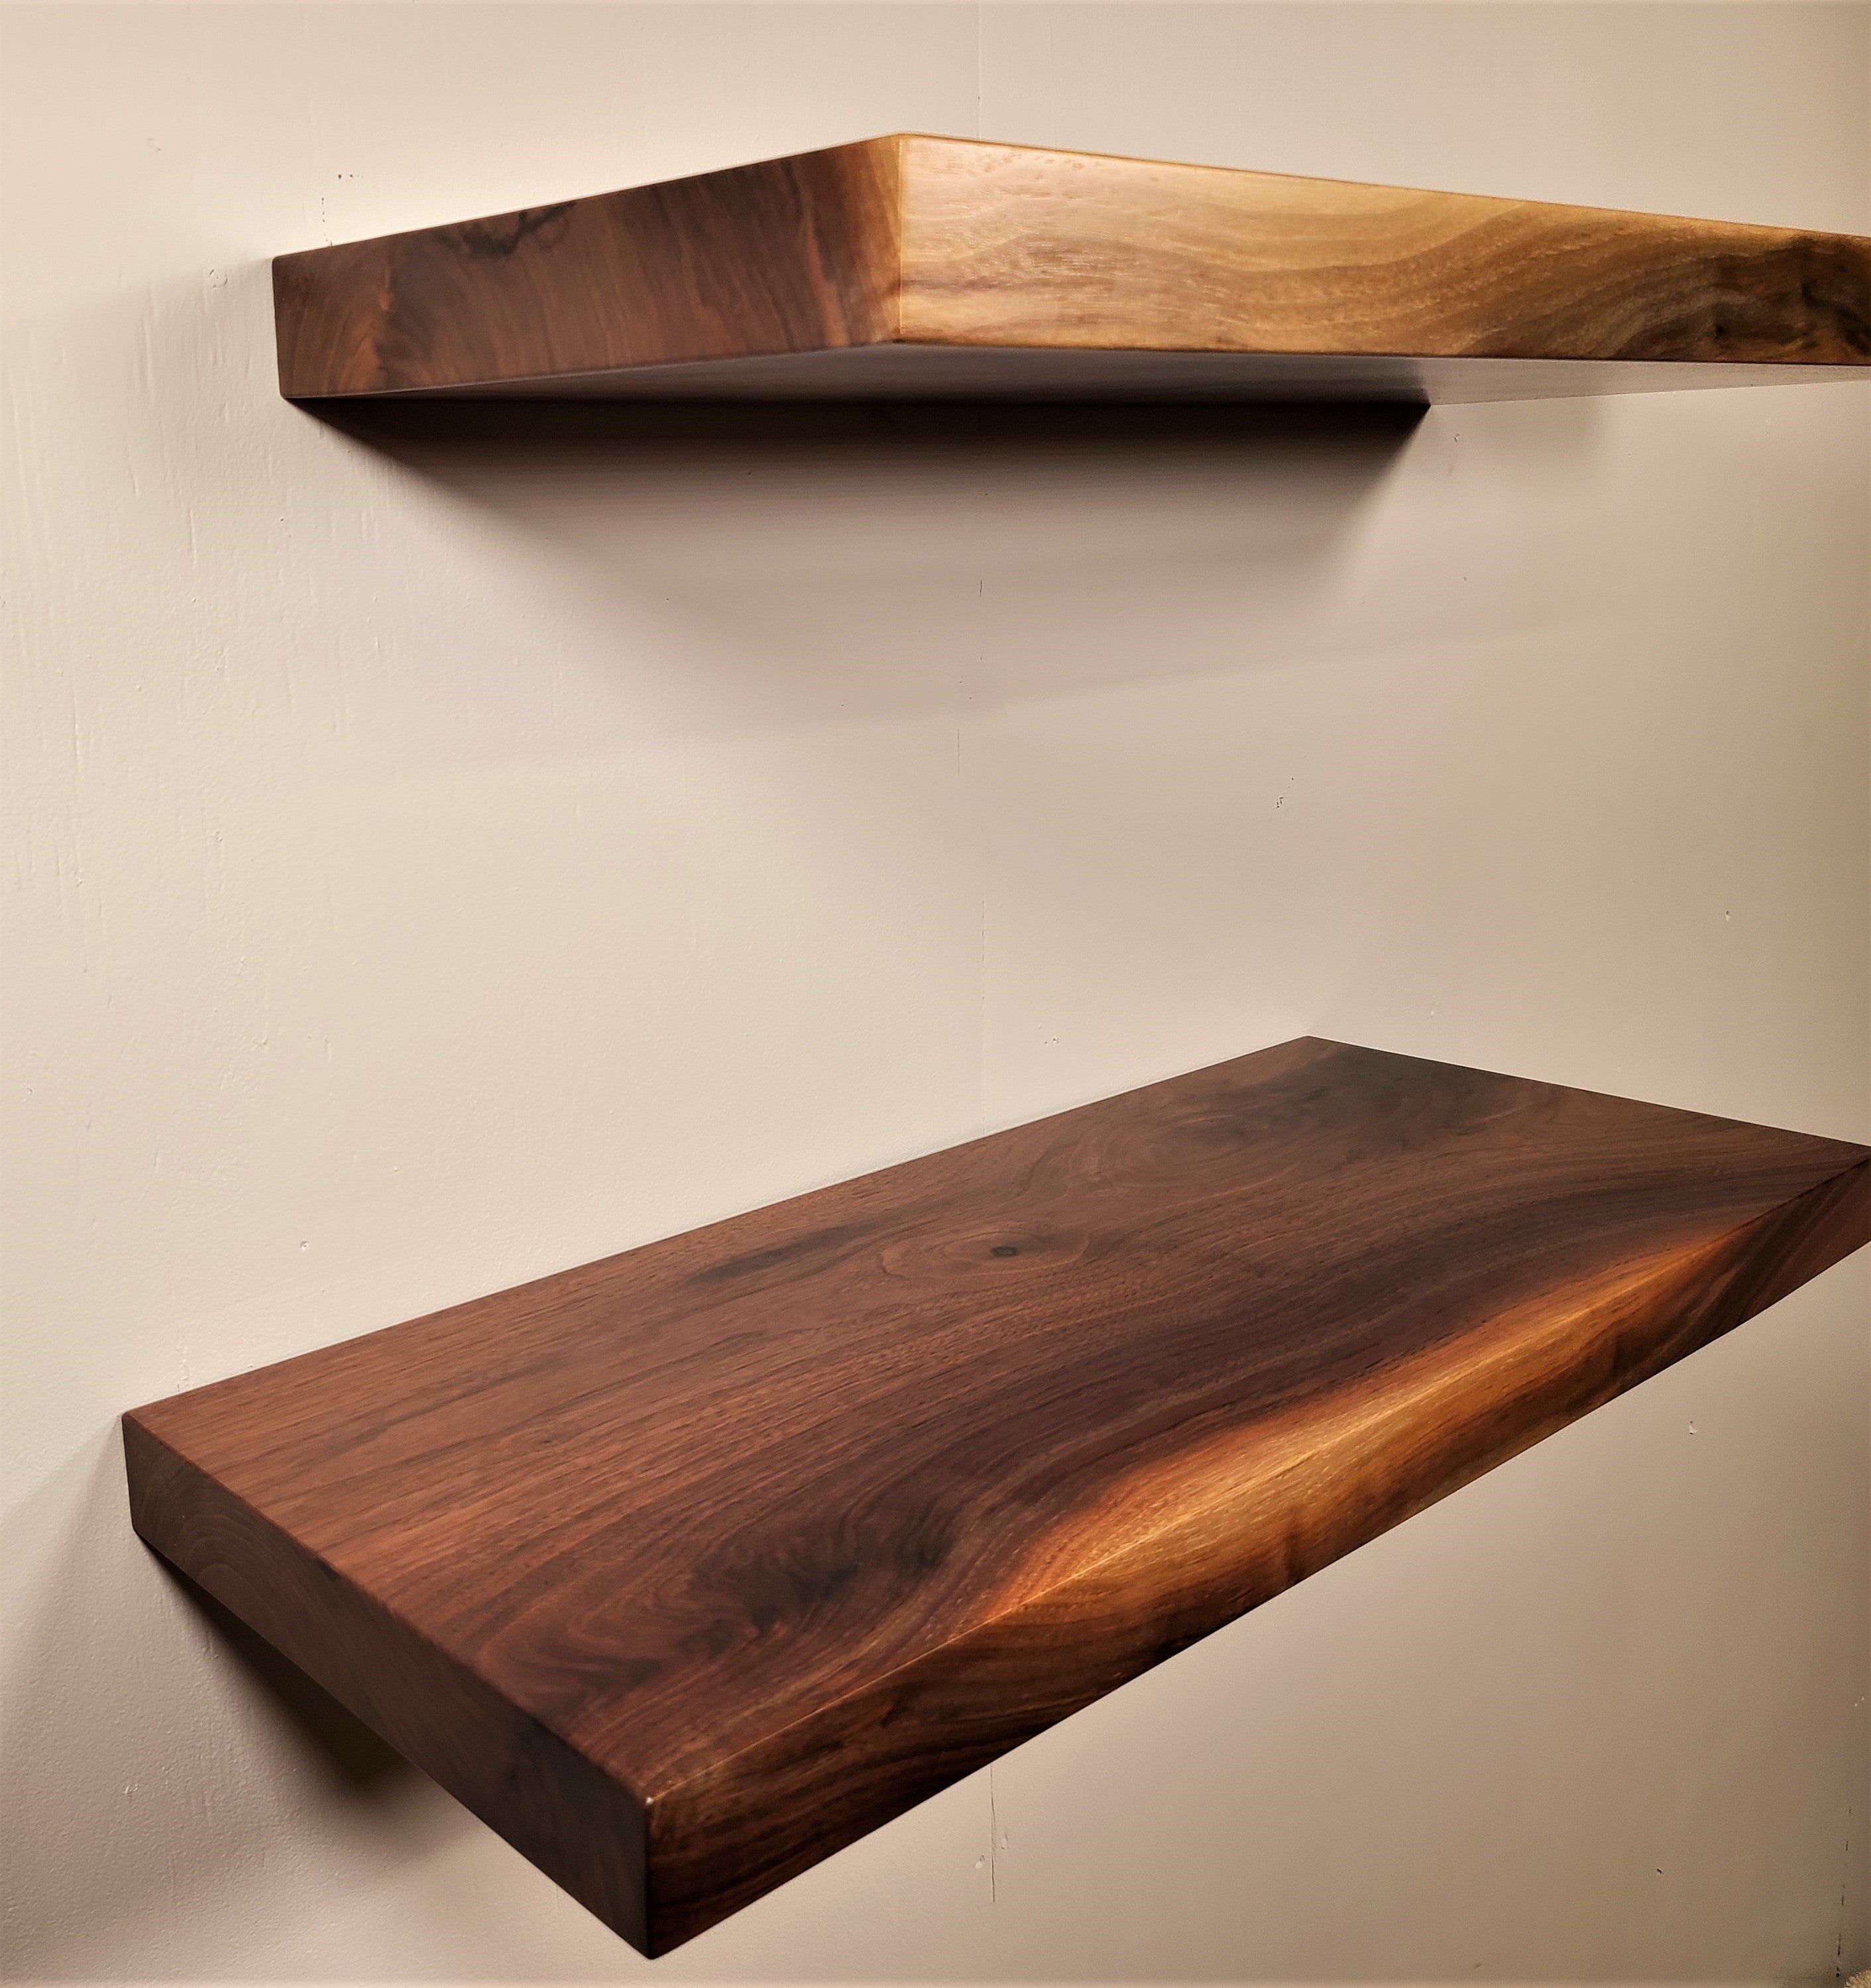 corner edge view of 2 thick walnut solid wood floating shelves made by Zimboards.